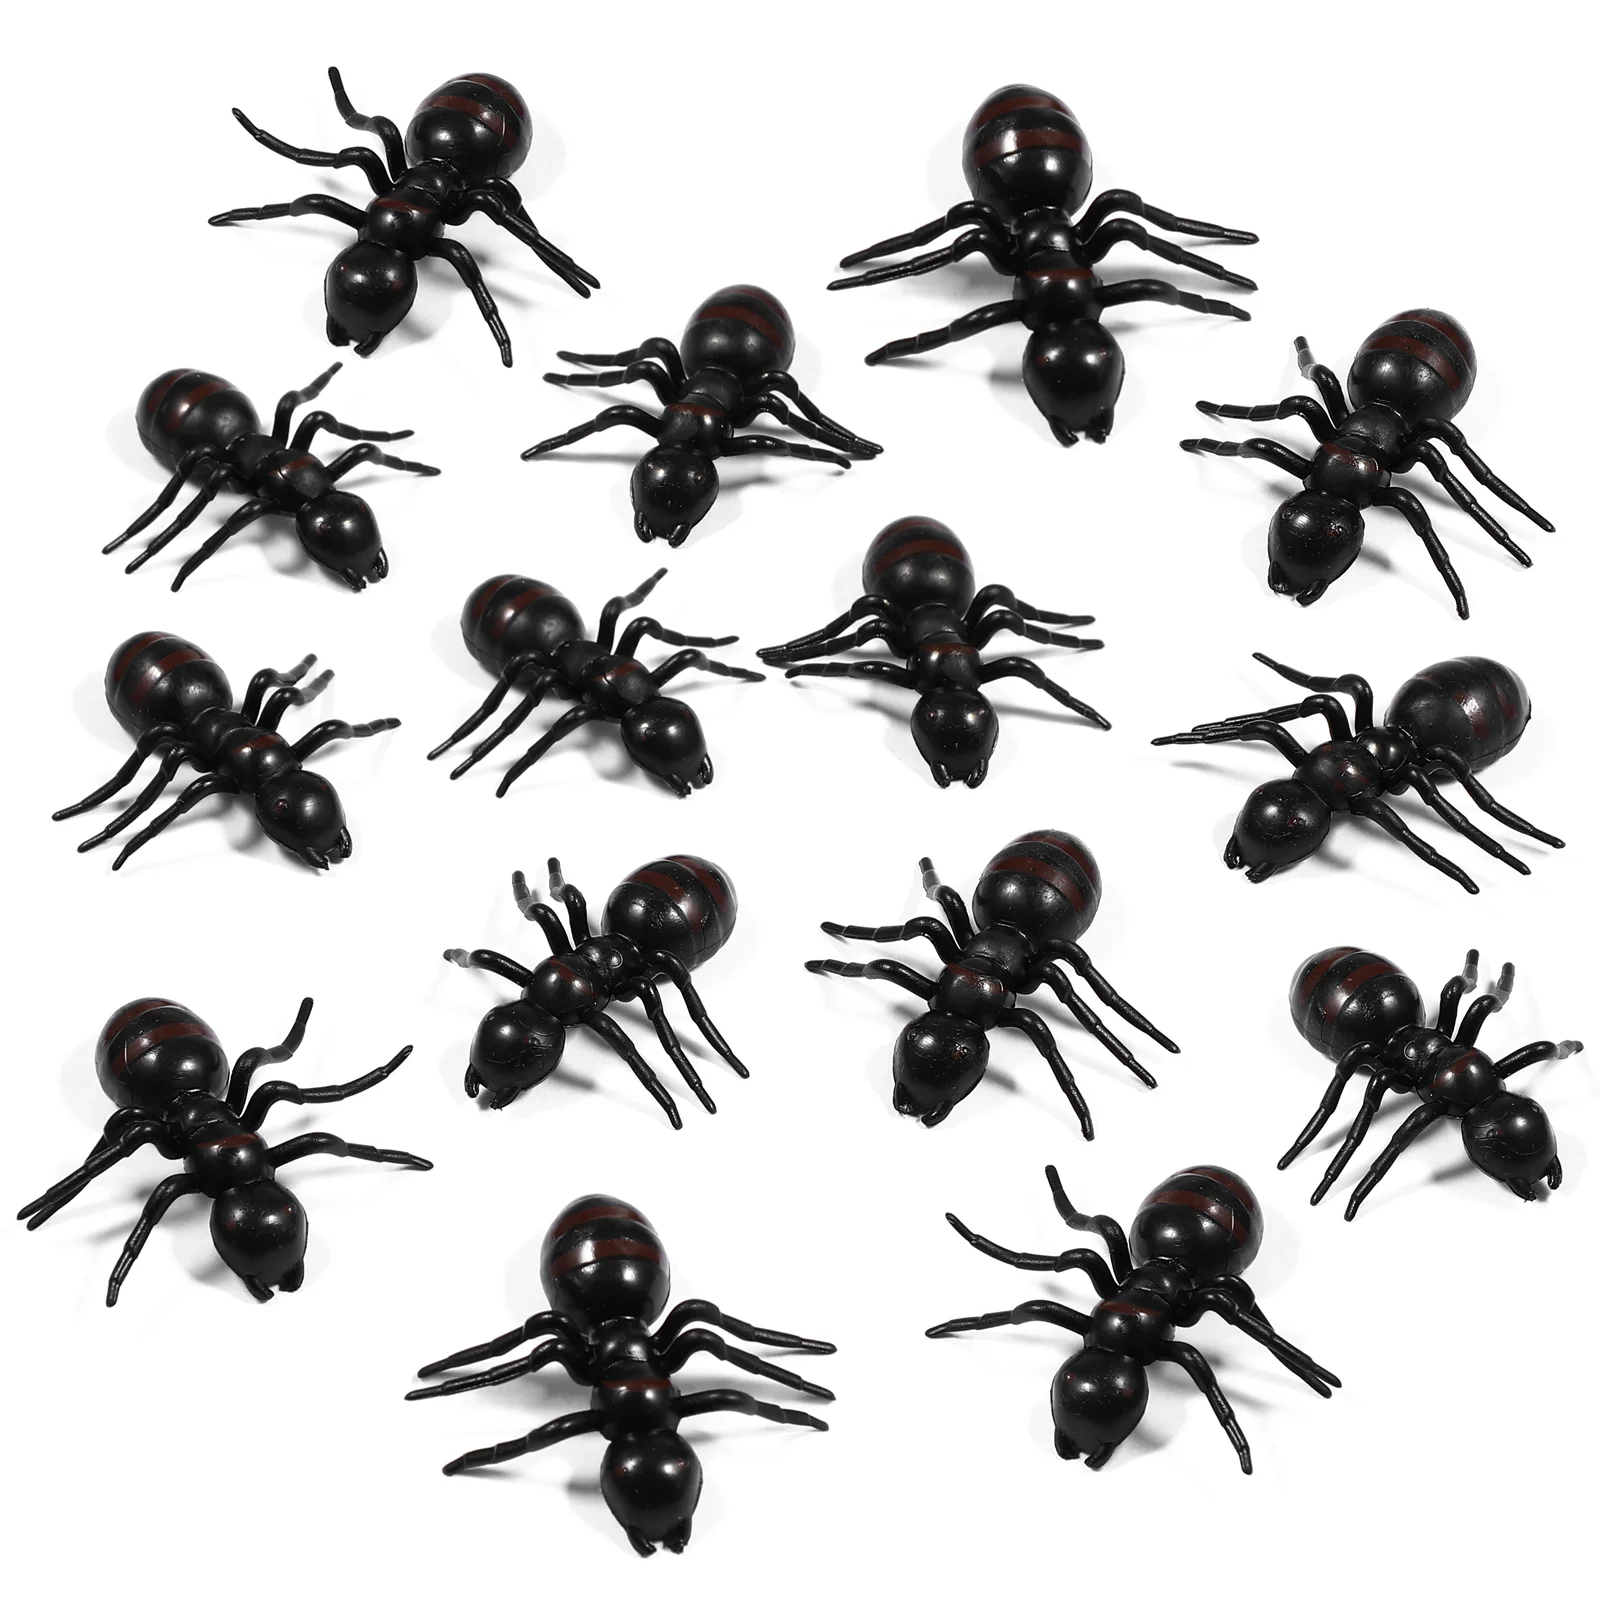 

50 PC Simulation Fake Big Ant Small Toys Halloween April Fools Day Animal Insect Model Gift Accessories Simulative